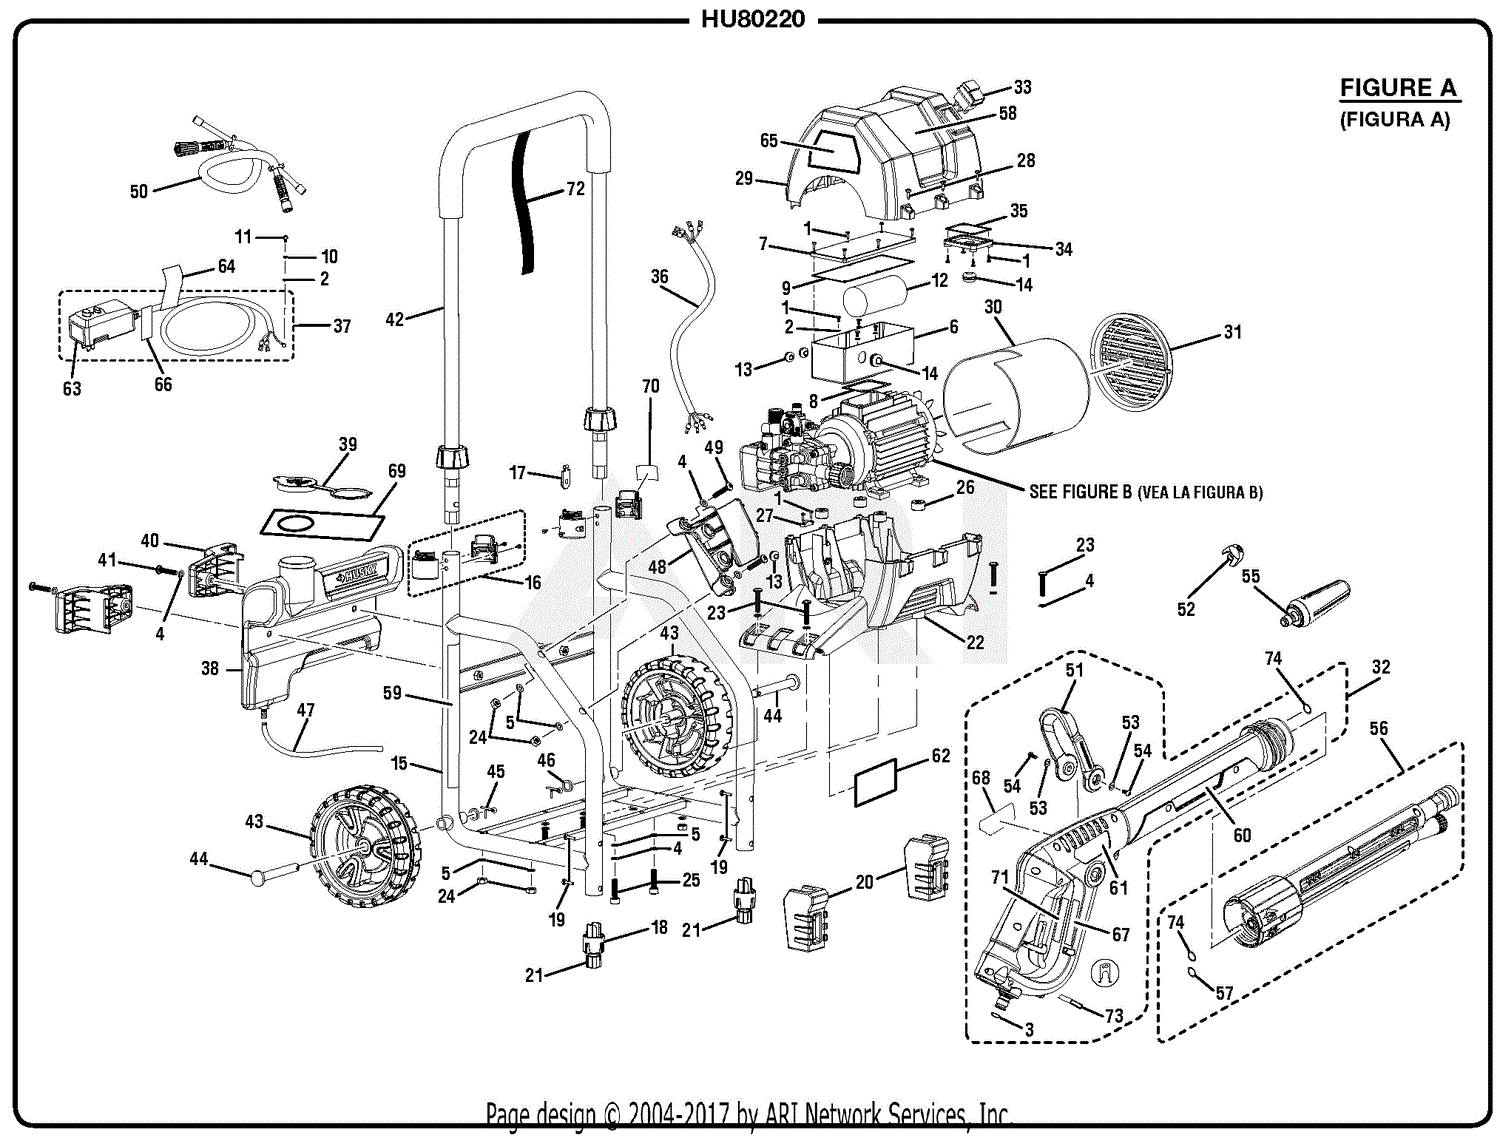 Homelite HU80220 Electric Pressure Washer Parts Diagram for Figure A